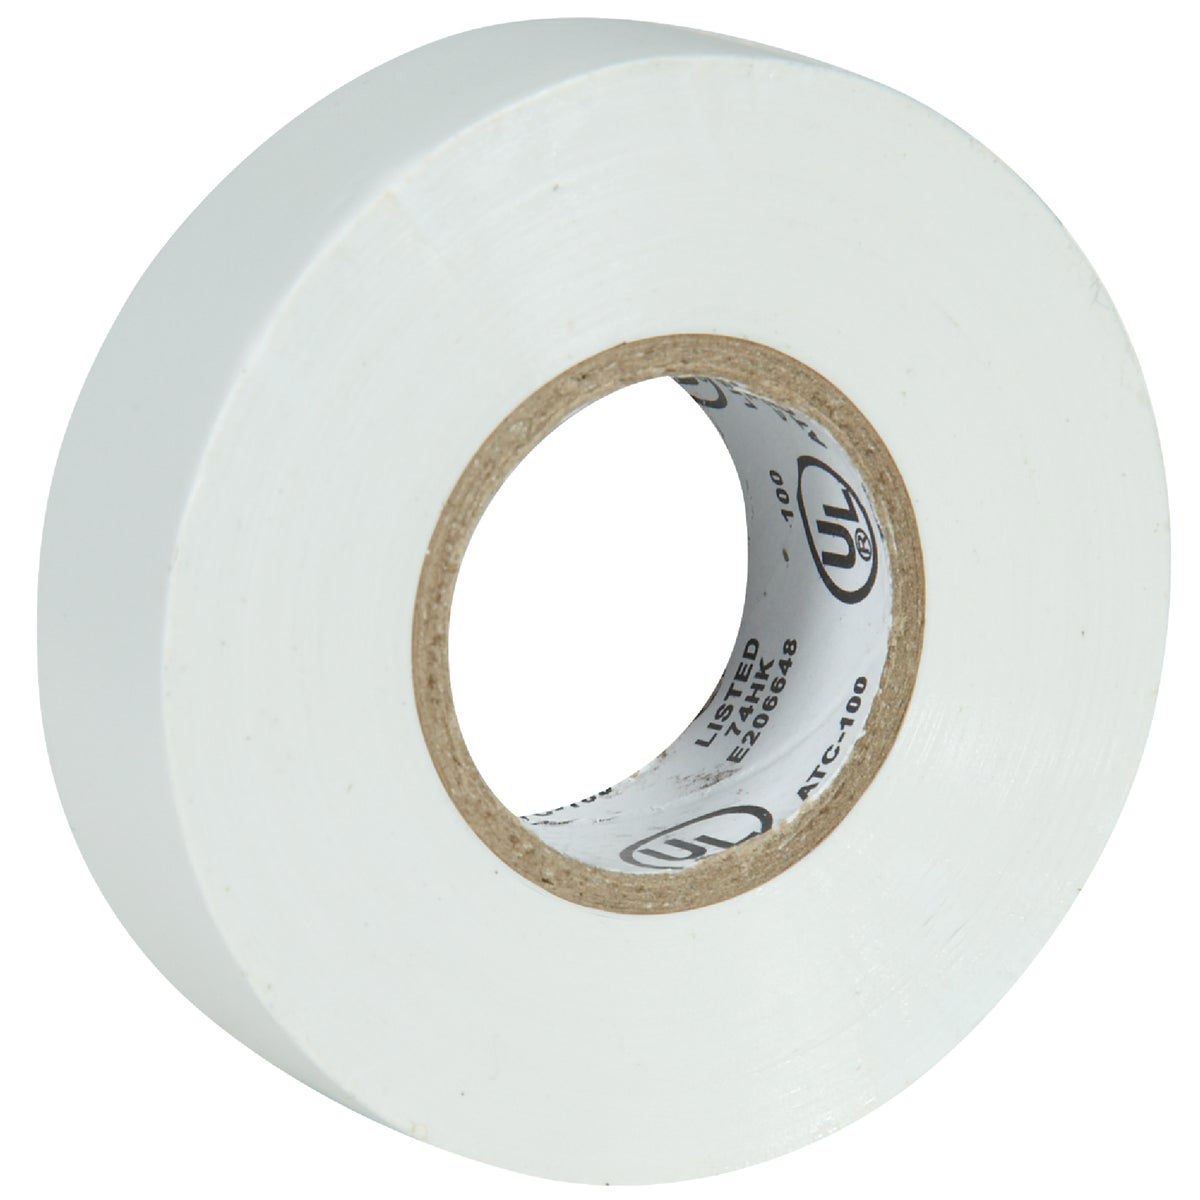 Do it General Purpose 3/4 In. x 60 Ft. White Electrical Tape